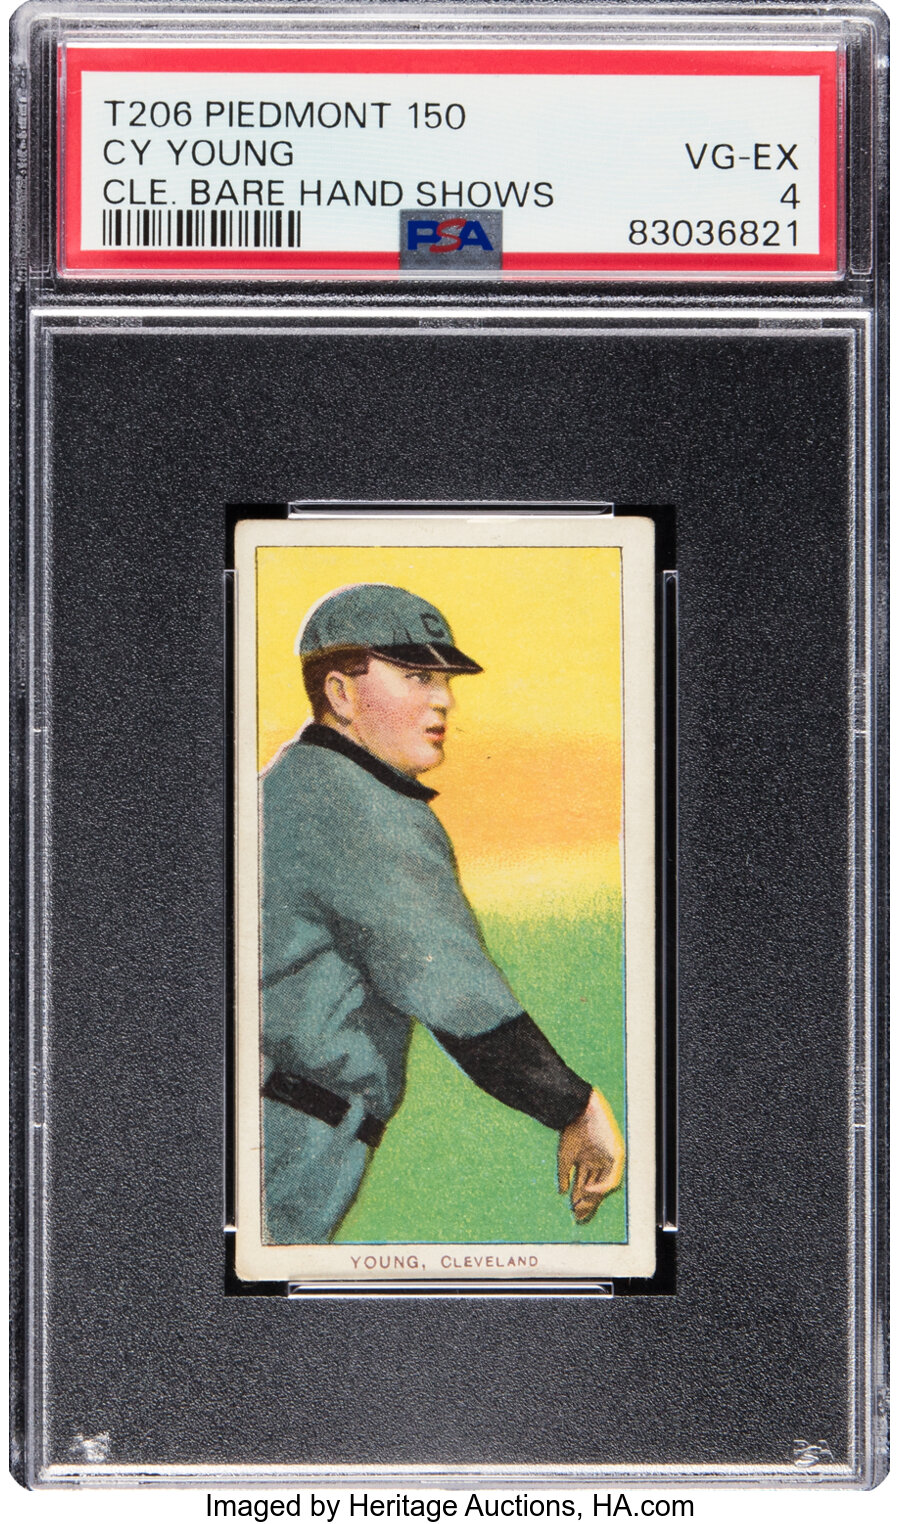 1909-11 T206 Piedmont 150 Cy Young (Bare Hand Shows) PSA VG-EX 4 - From The Ramsburg Collection